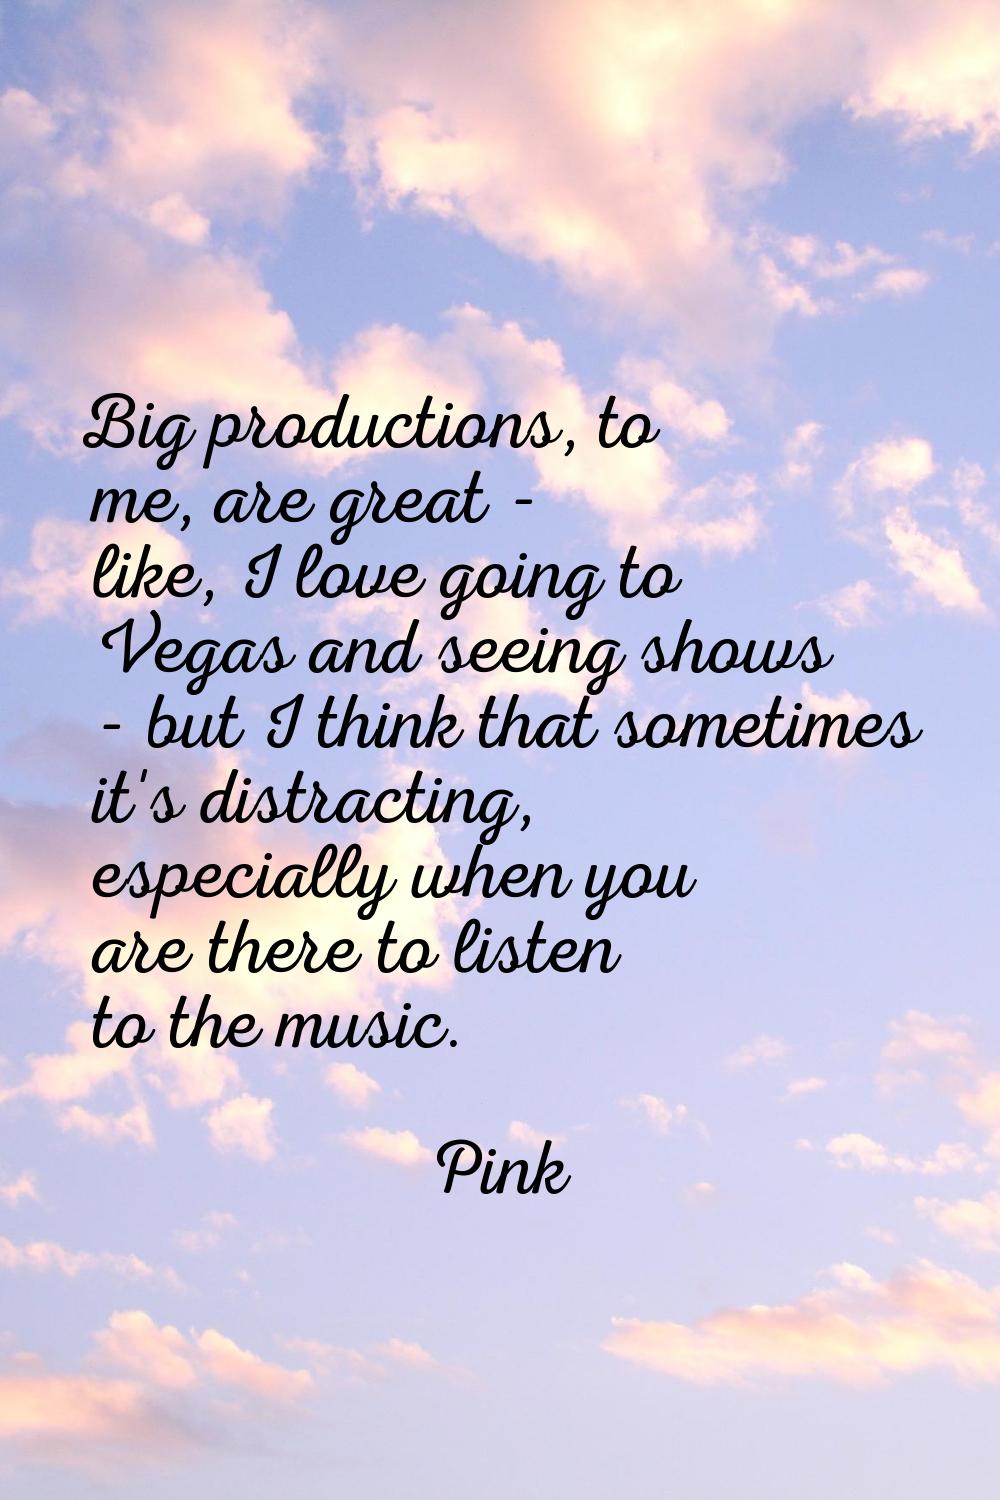 Big productions, to me, are great - like, I love going to Vegas and seeing shows - but I think that